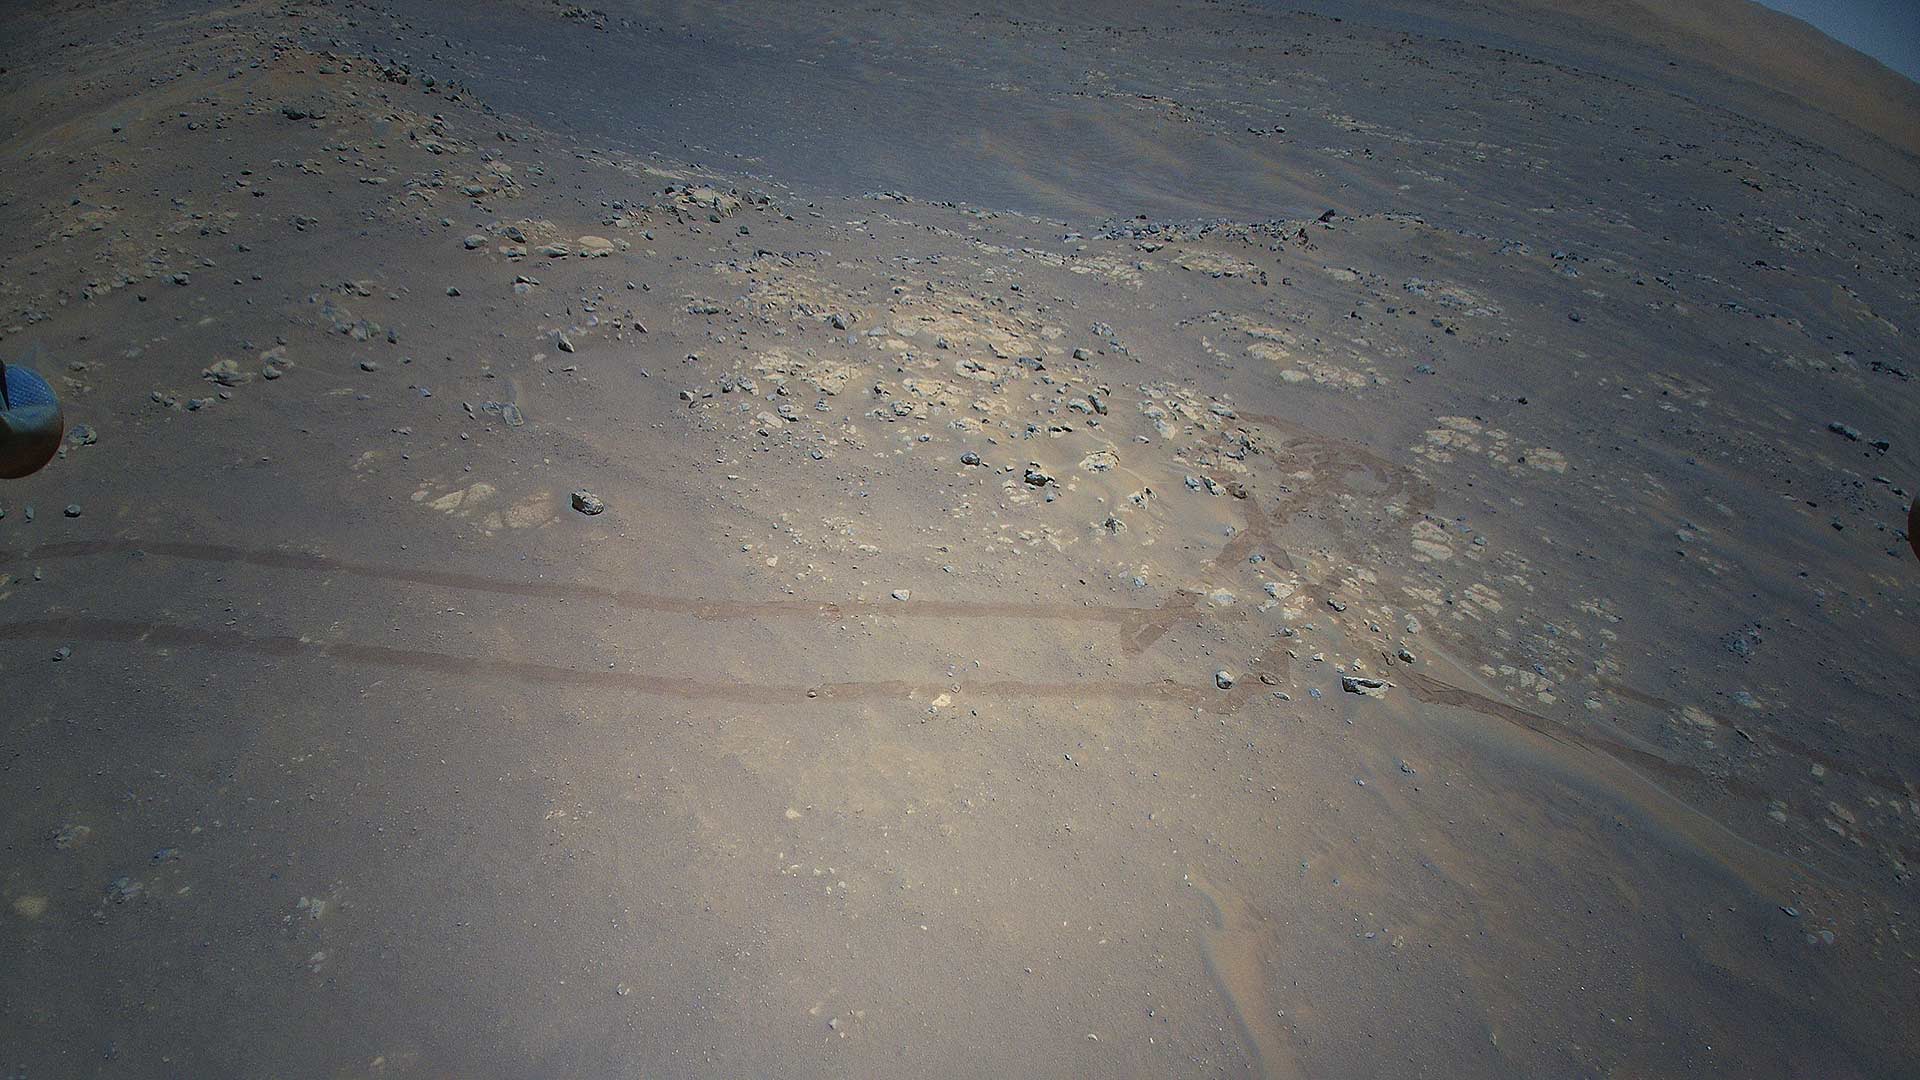 Mars_Helicopter_aerial-shot-of-perseverance-tracks